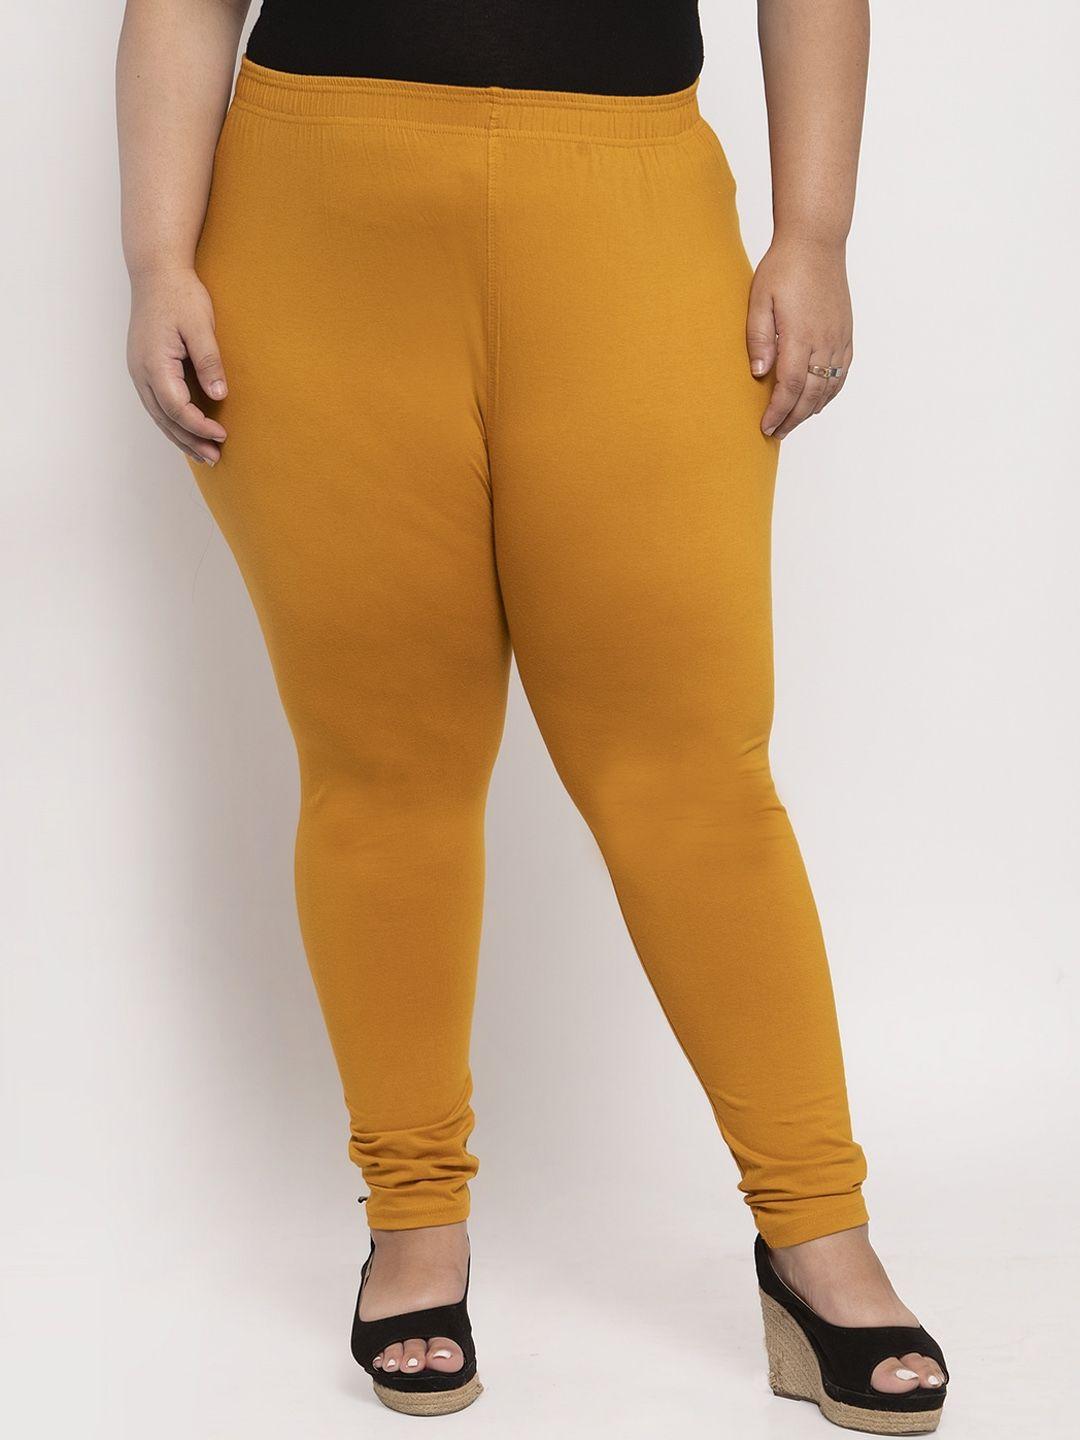 tag 7 plus women mustard yellow solid ankle-length plus size leggings